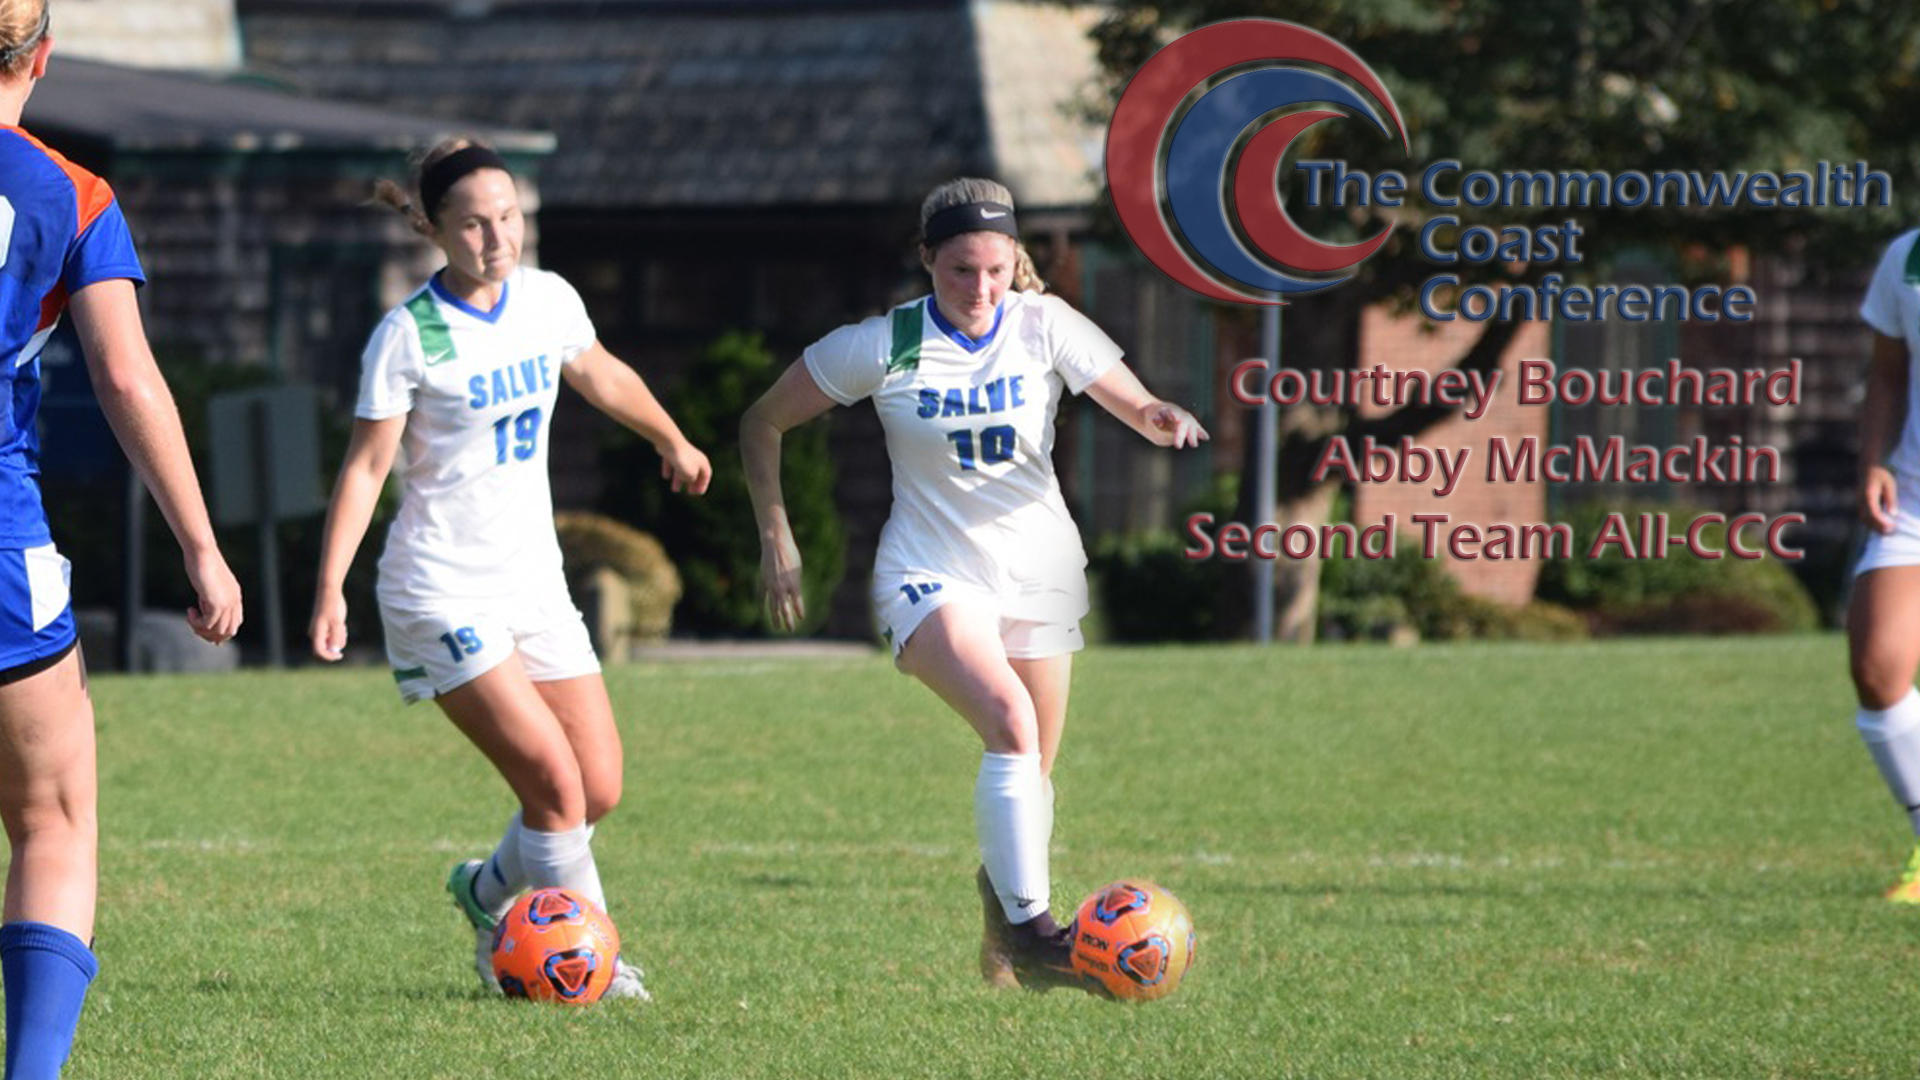 2017 All-CCC for women's soccer: Courtney Bouchard, Abby McMackin